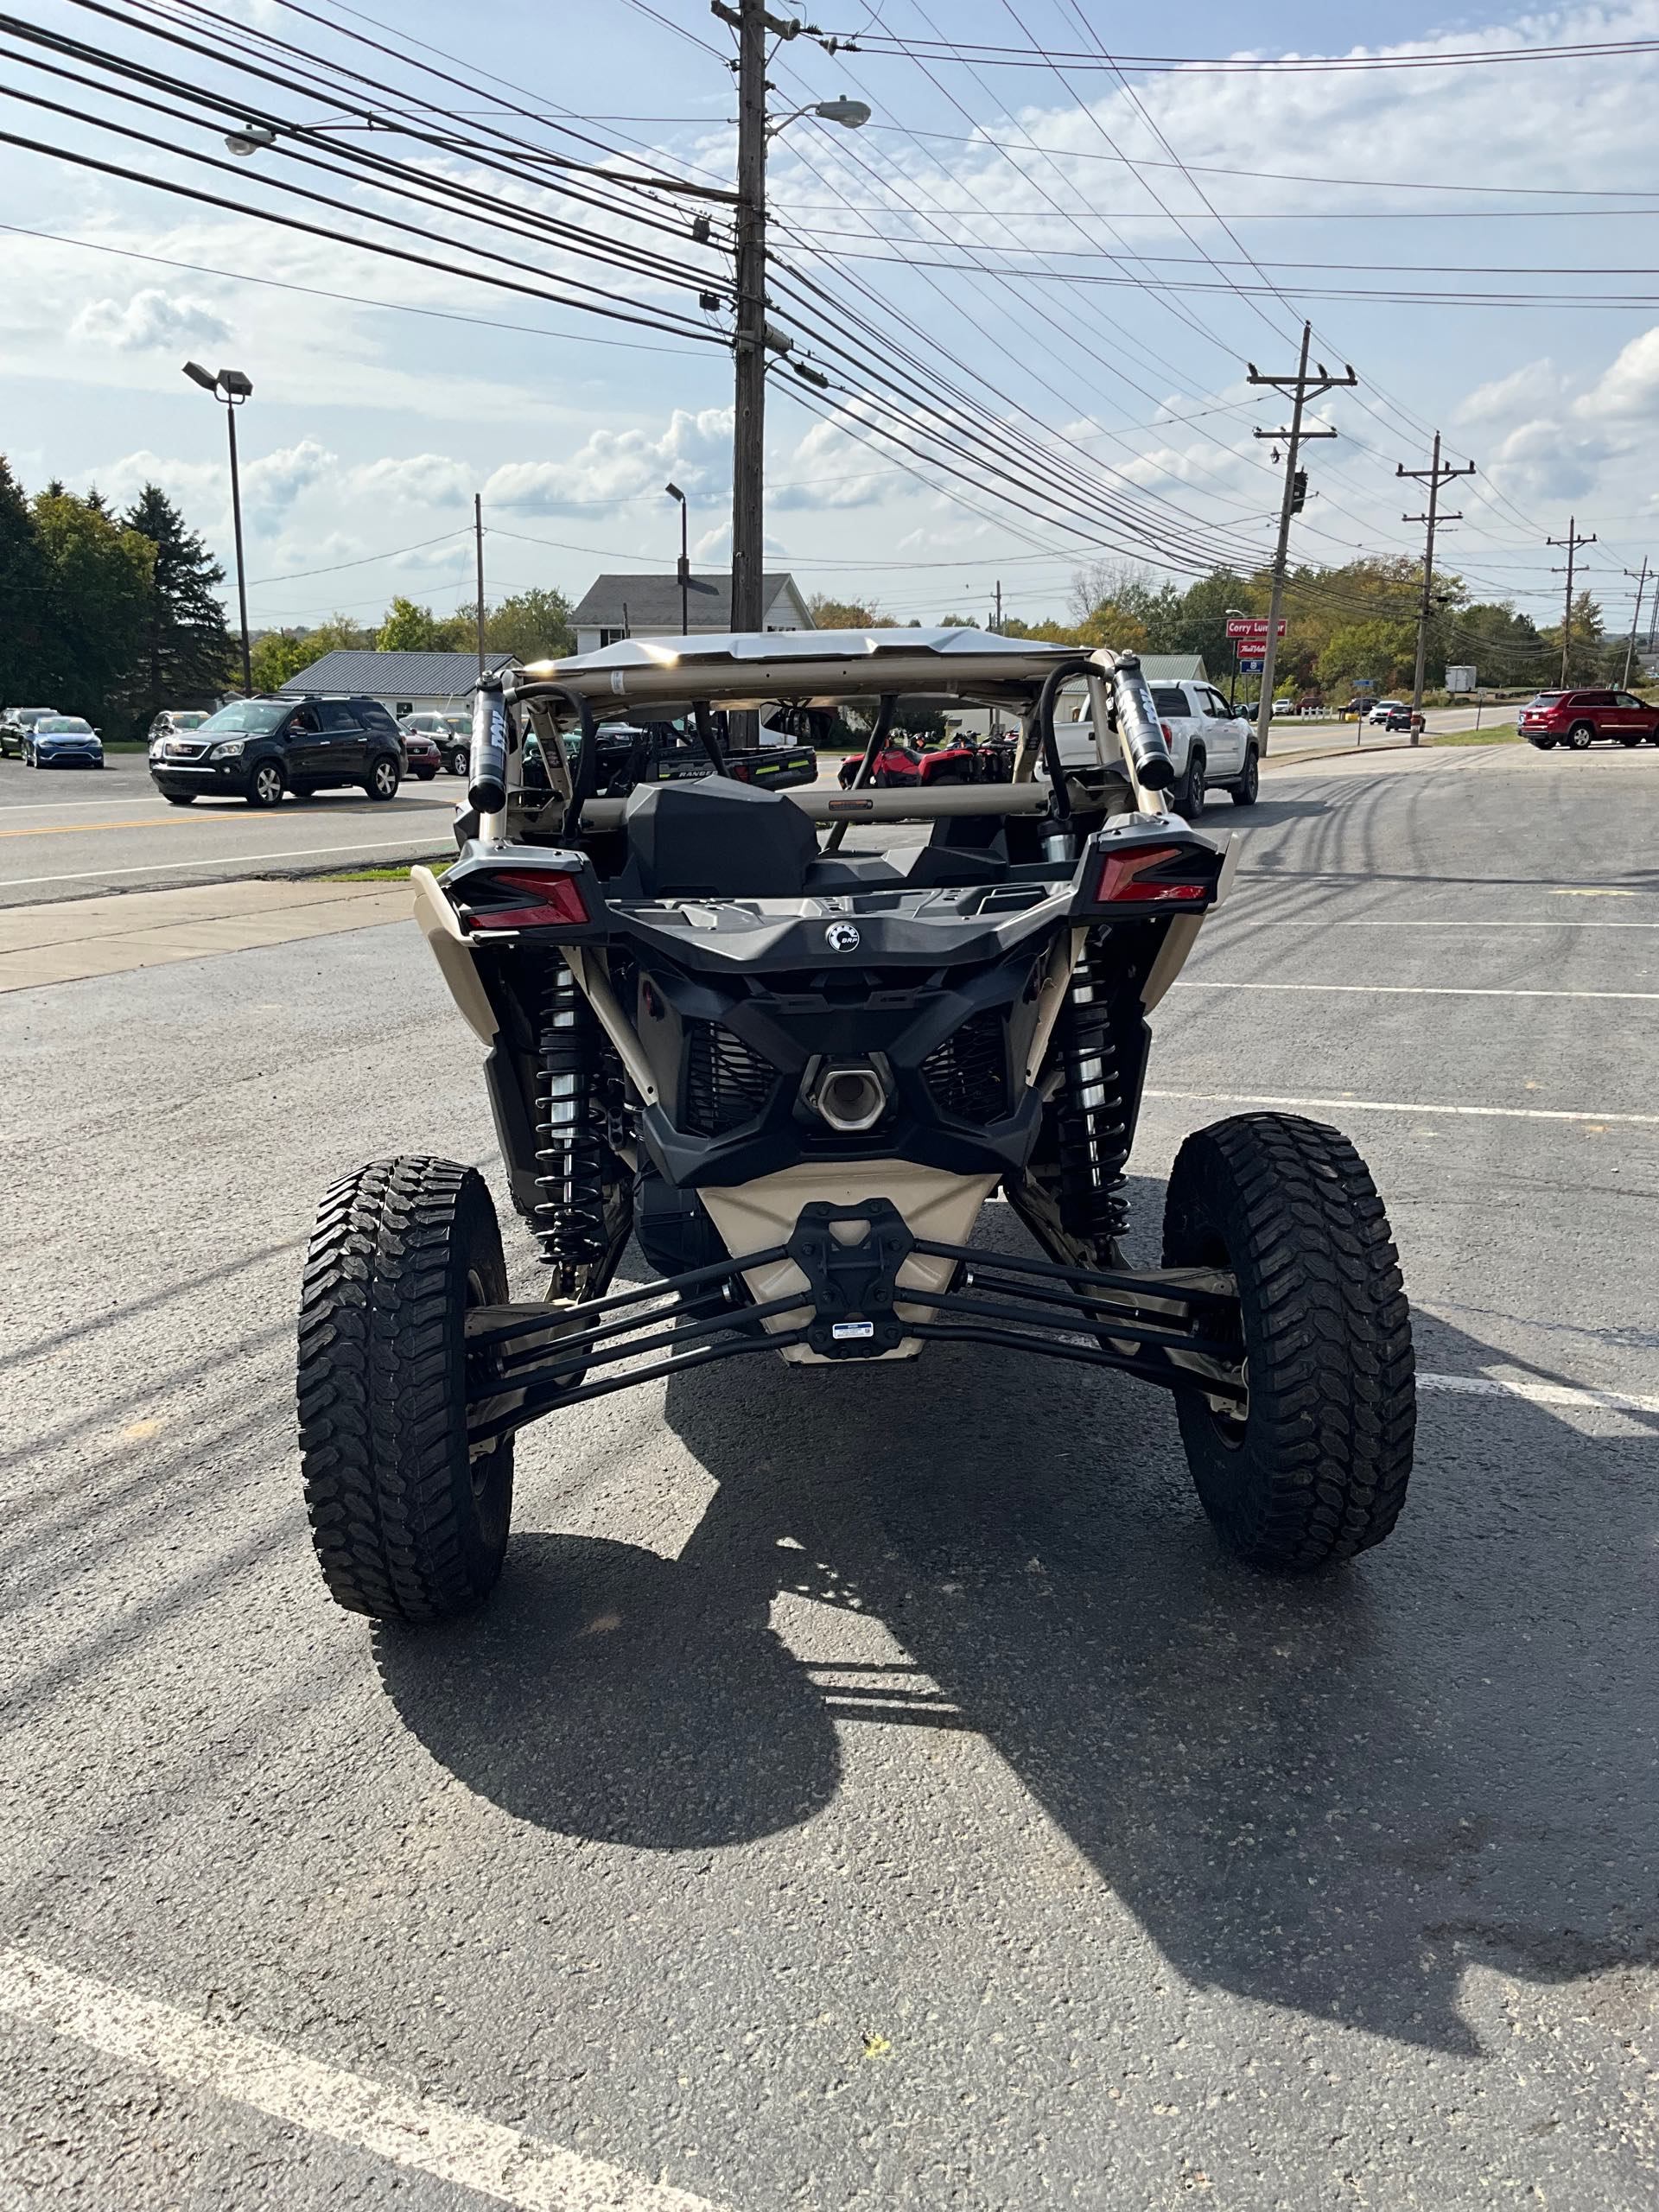 2023 Can-Am Maverick X3 X rc TURBO RR 72 at Leisure Time Powersports of Corry